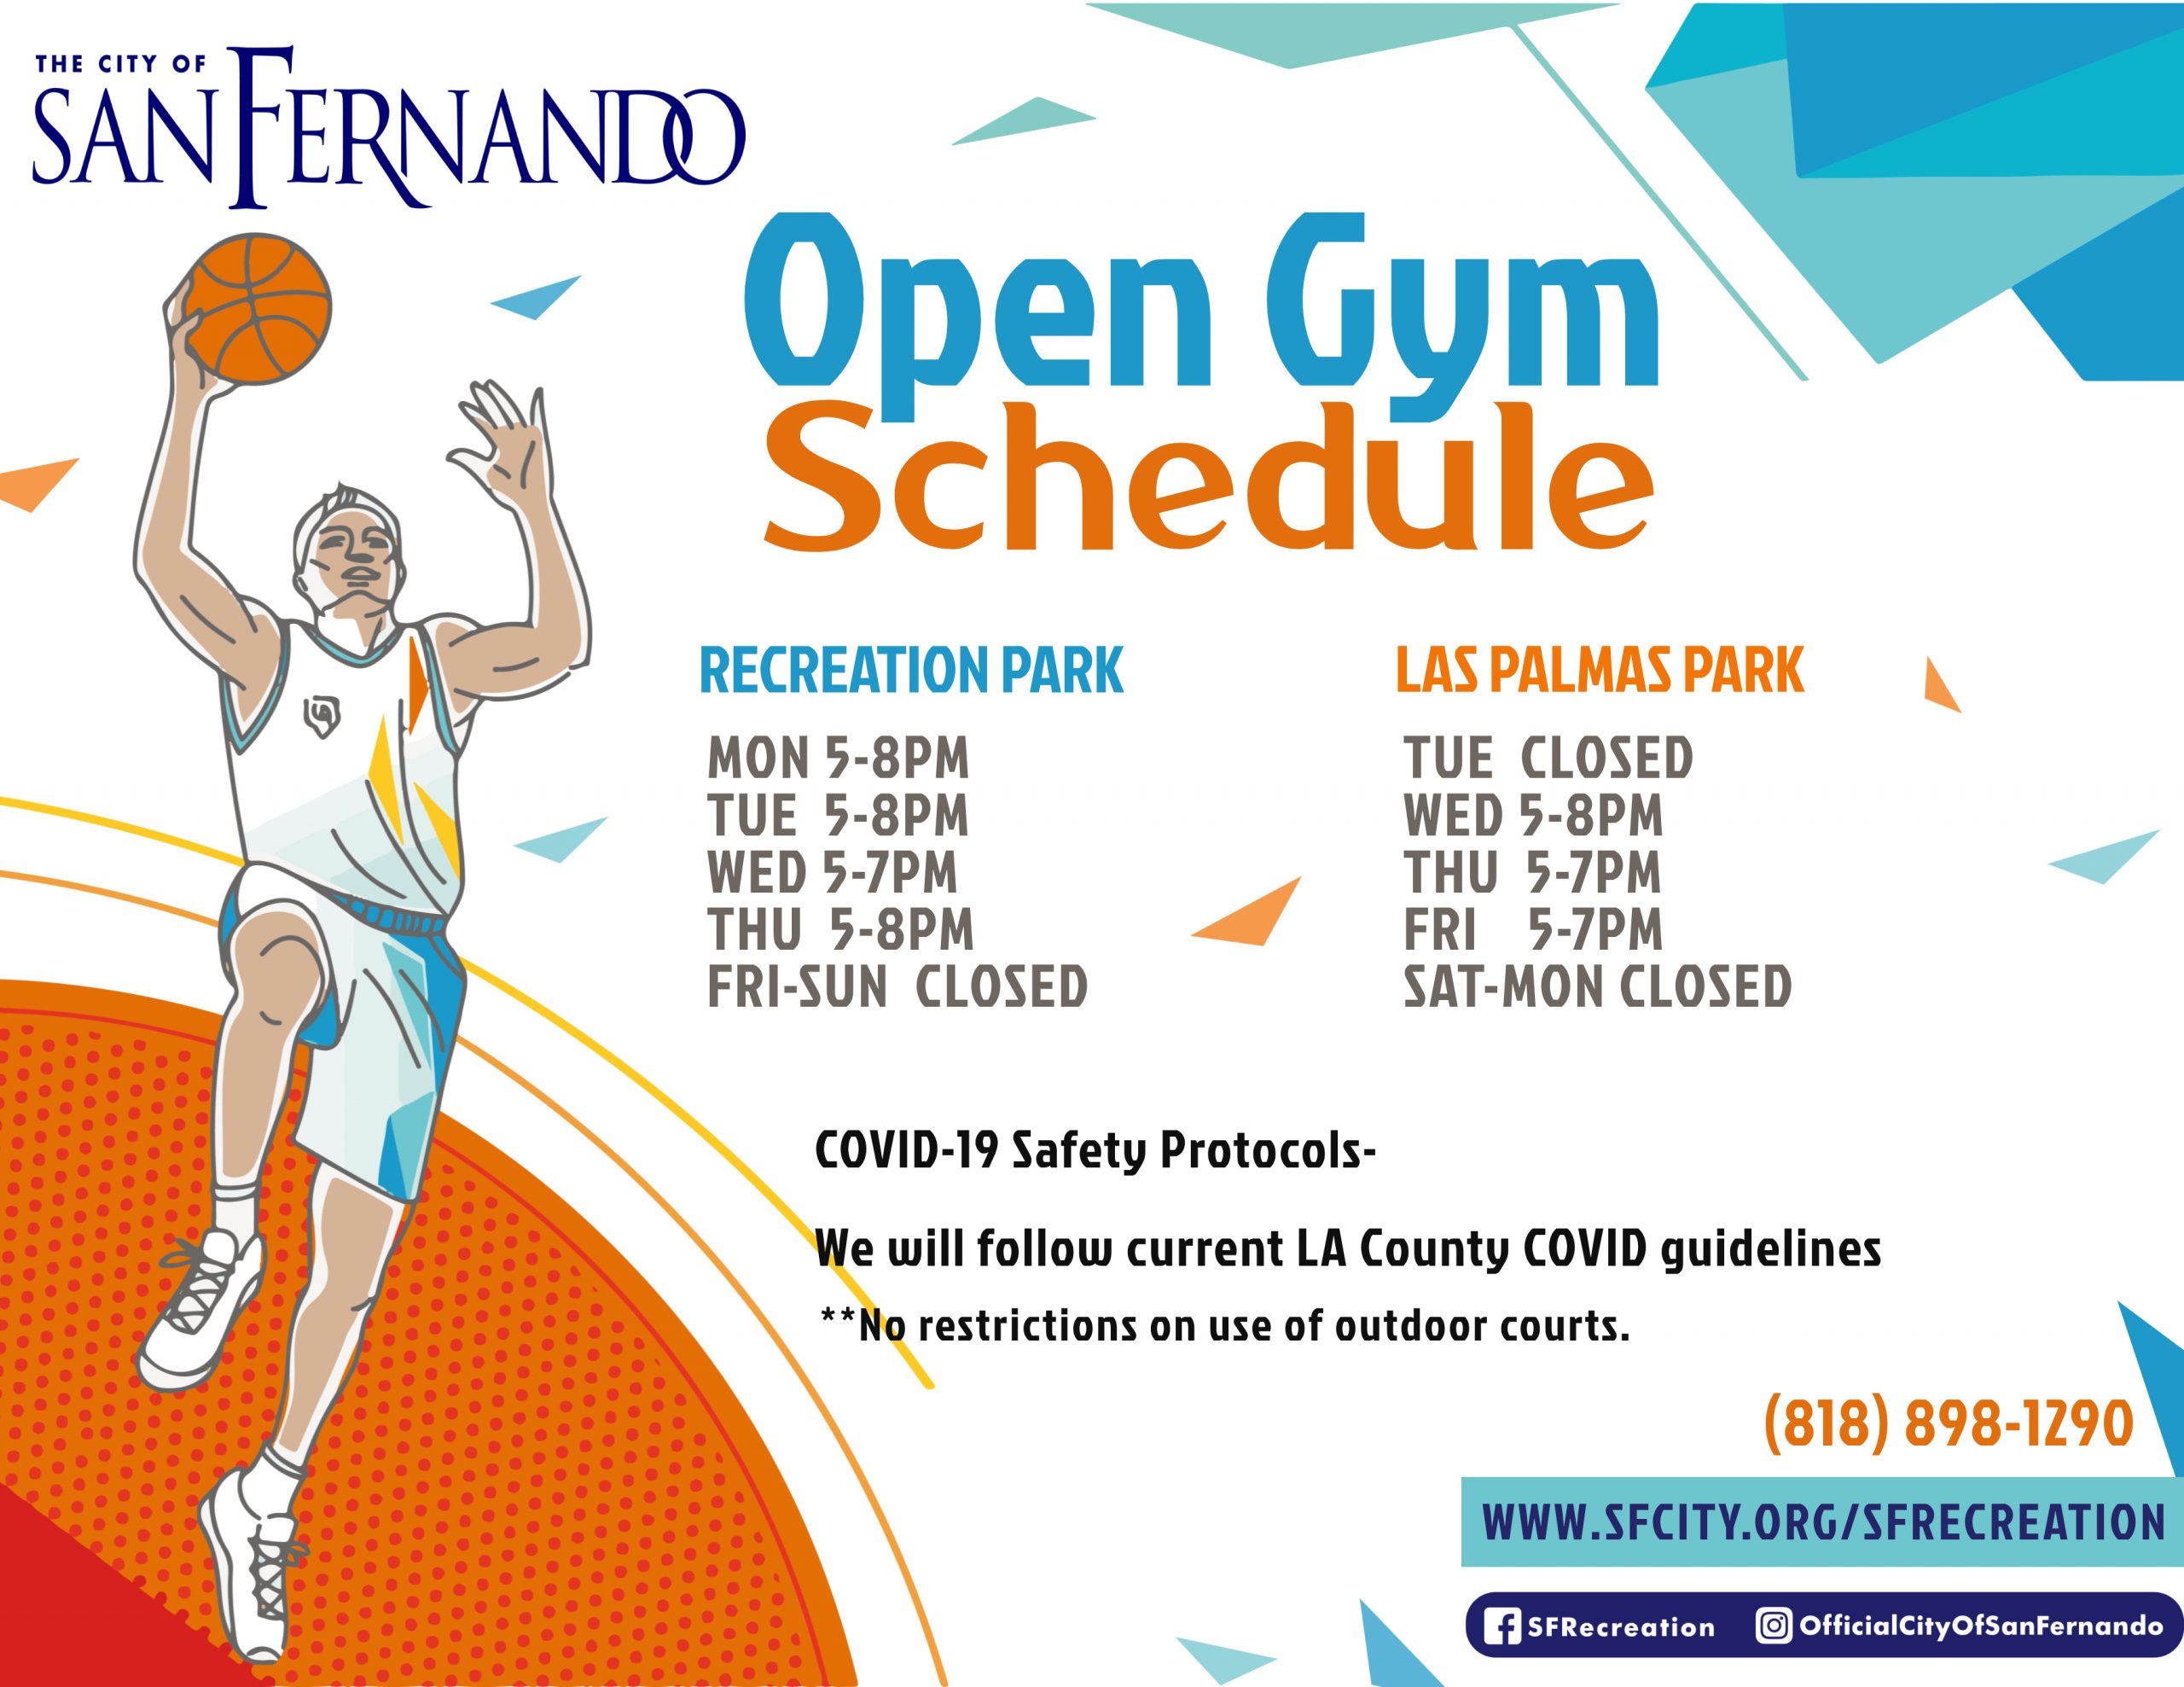 graphic of basketball player and open gym schedule